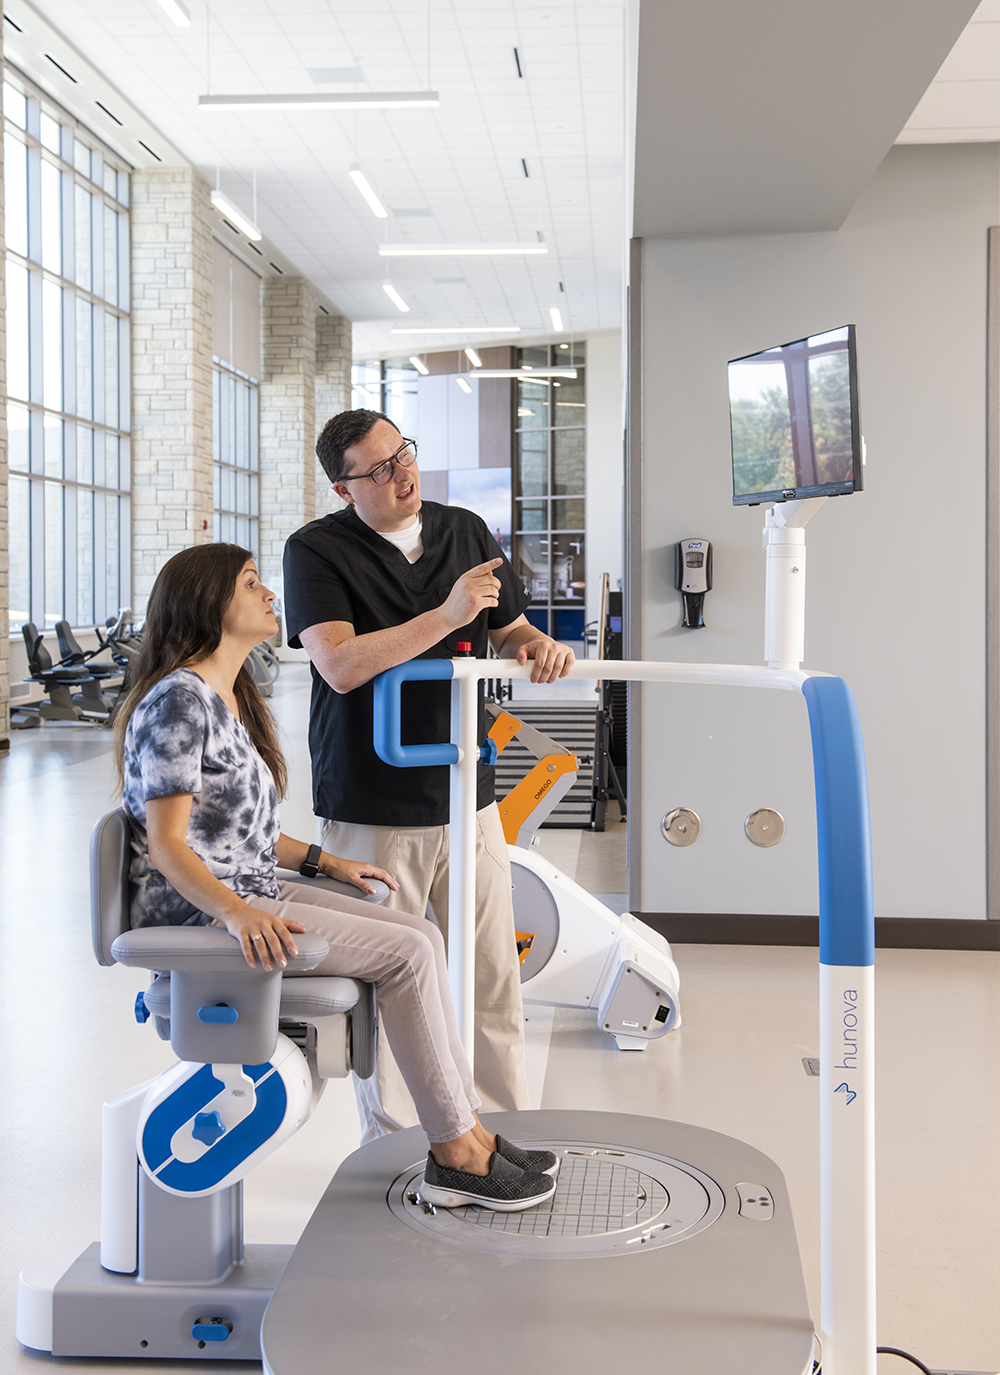 Hunova®: This advanced robot enables patients to work on posture control, body position, and balance. It is also used to evaluate the fall risk of patients recovering from cognitive impairment.